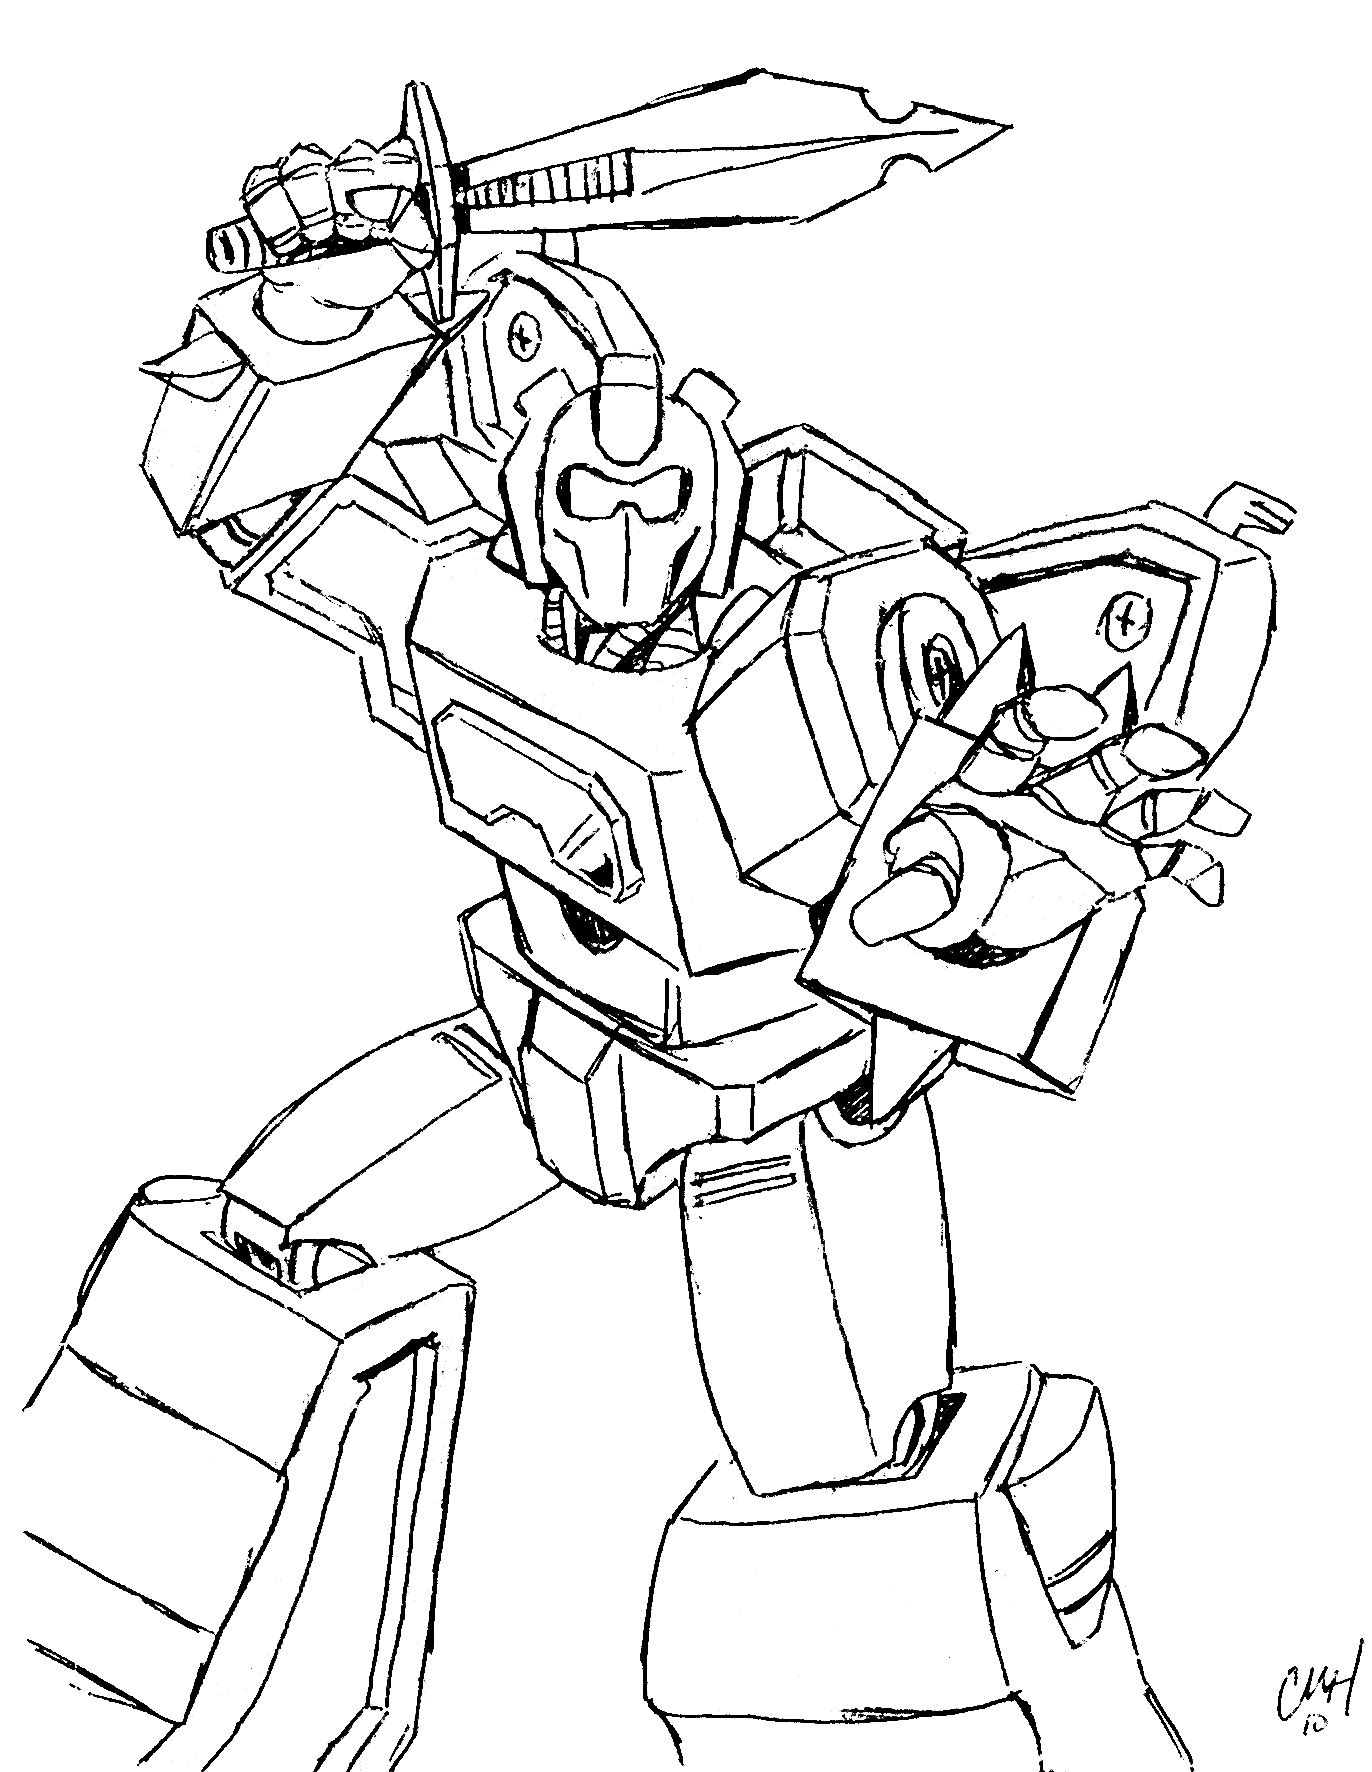 653 Animal Optimus Prime Transformers Coloring Pages with disney character